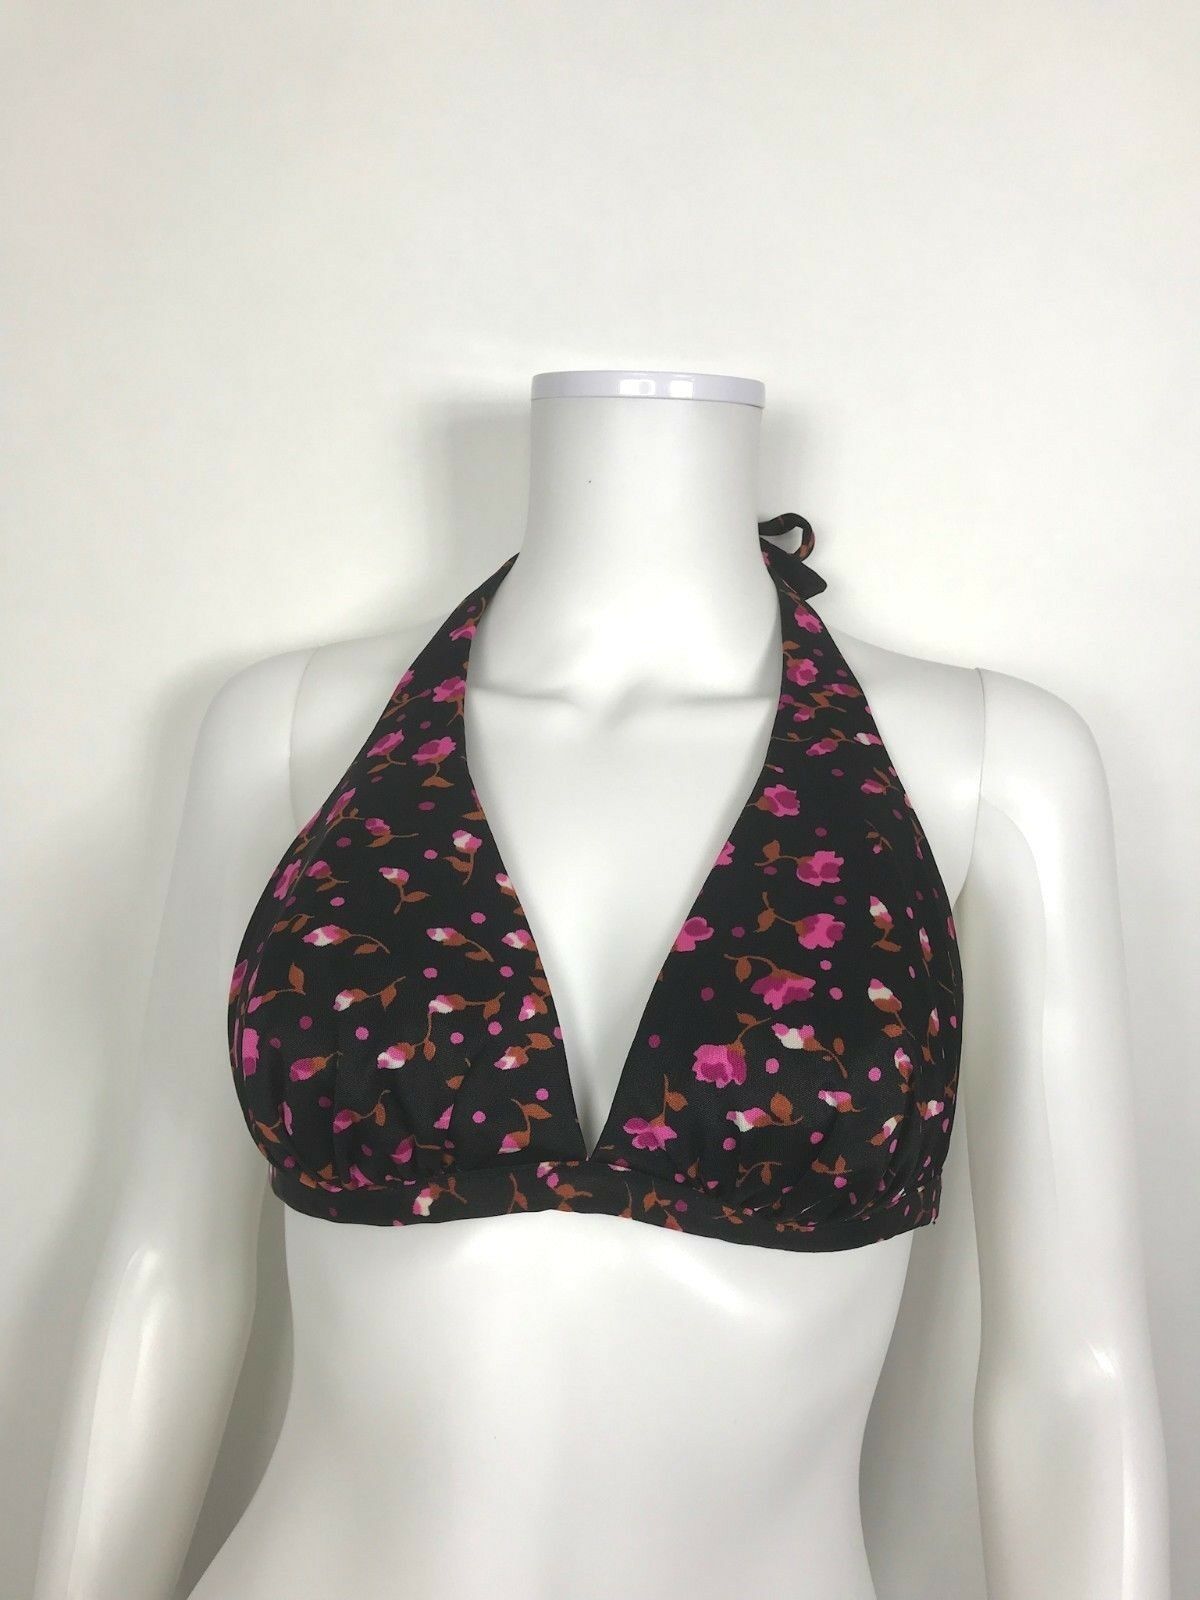 Primary image for Vintage 1970s  Pinup Bikini Top by High Tide size 11/12 Black Pink Floral Print